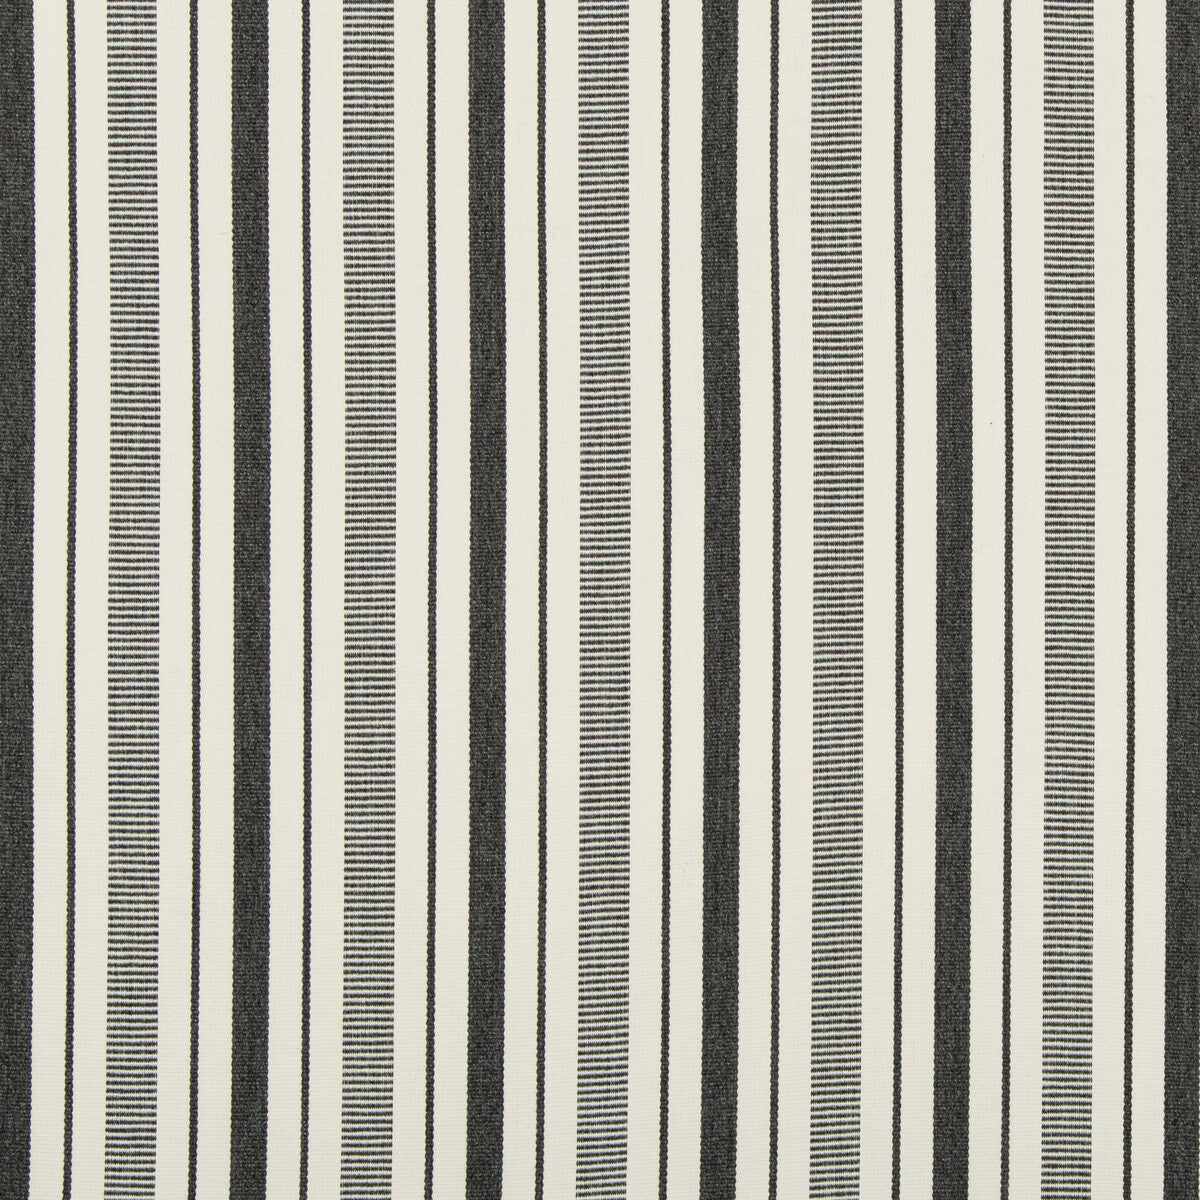 Martiques fabric in charcoal color - pattern 2019129.121.0 - by Lee Jofa